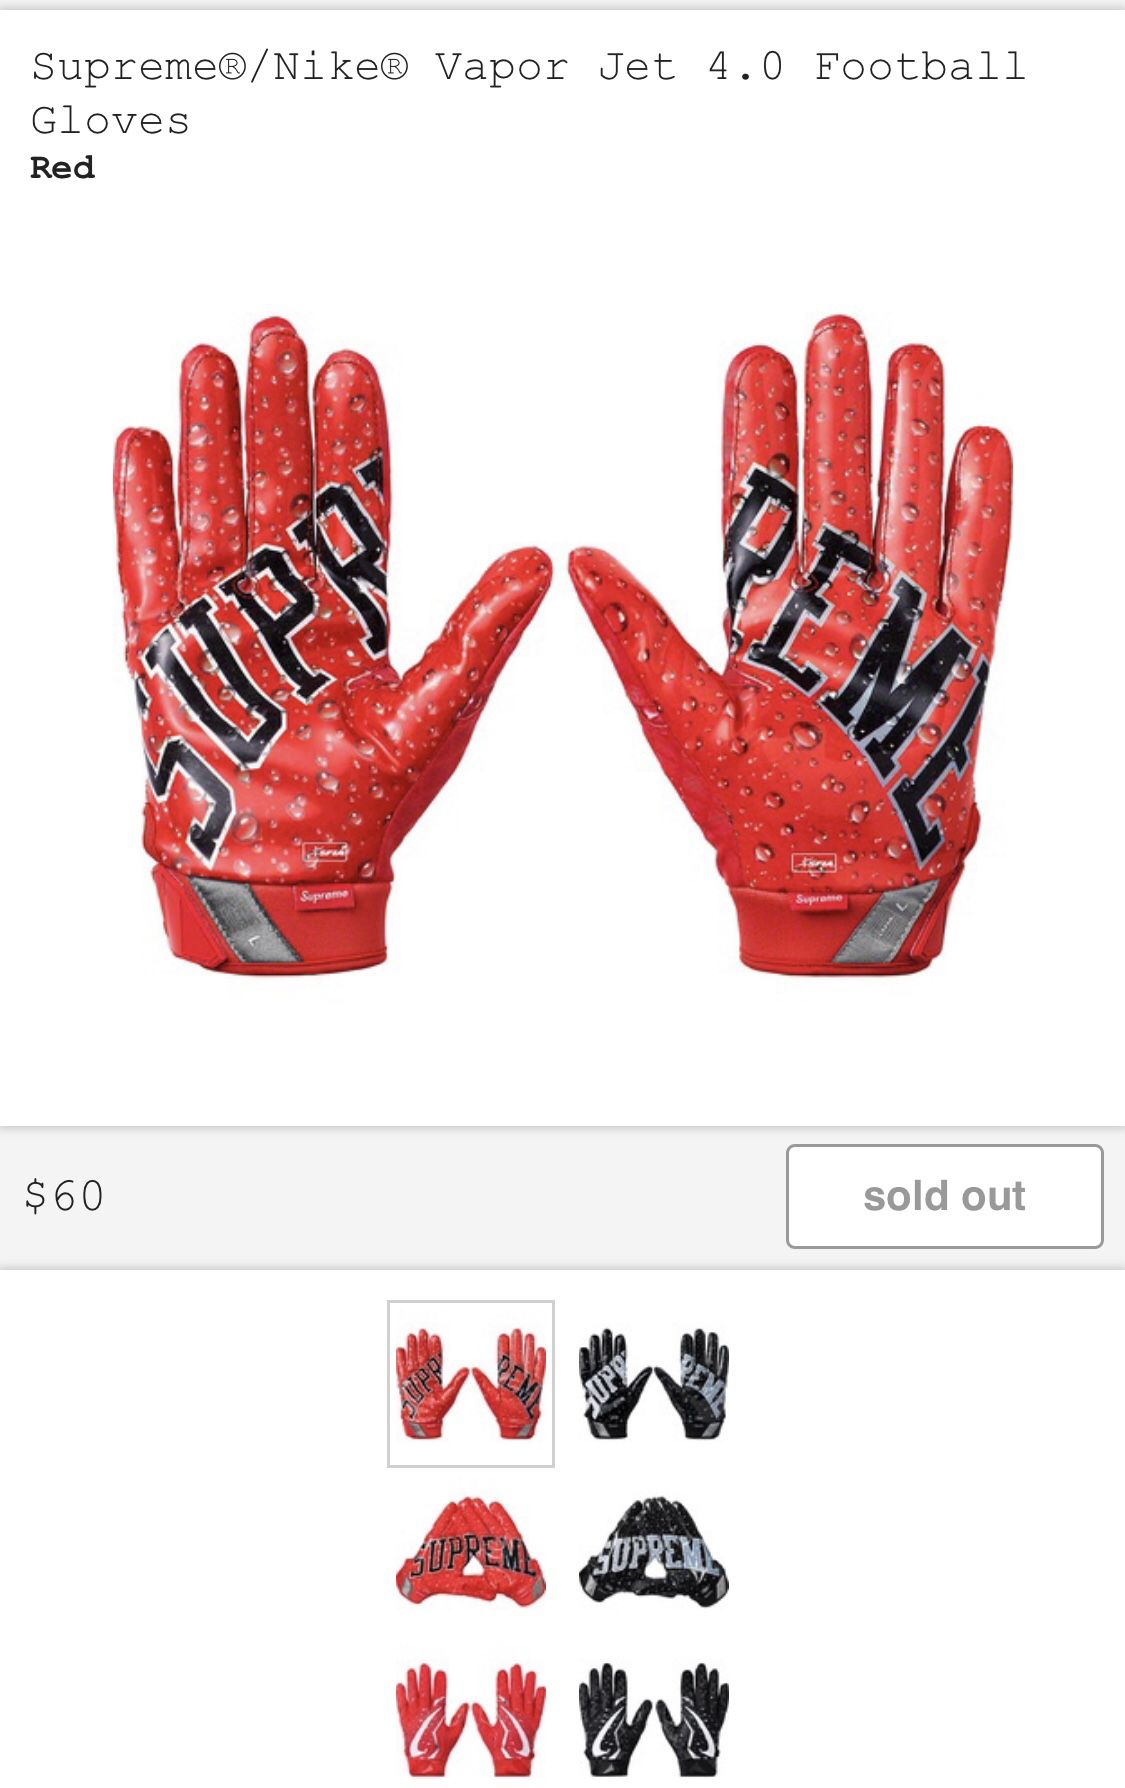 Supreme/Nike vapor jet football gloves for Sale in Brooklyn, NY - OfferUp